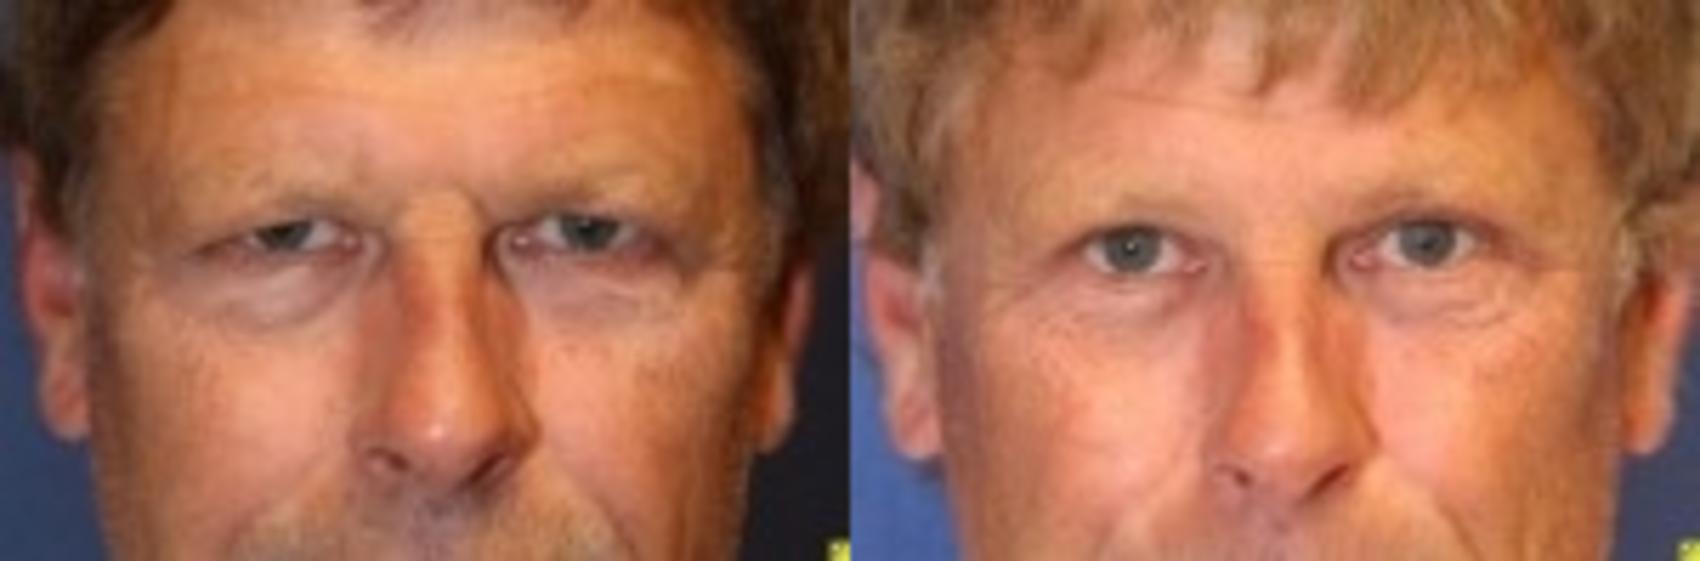 Before & After Eyelid Surgery Case 180 Front View in Ypsilanti, MI